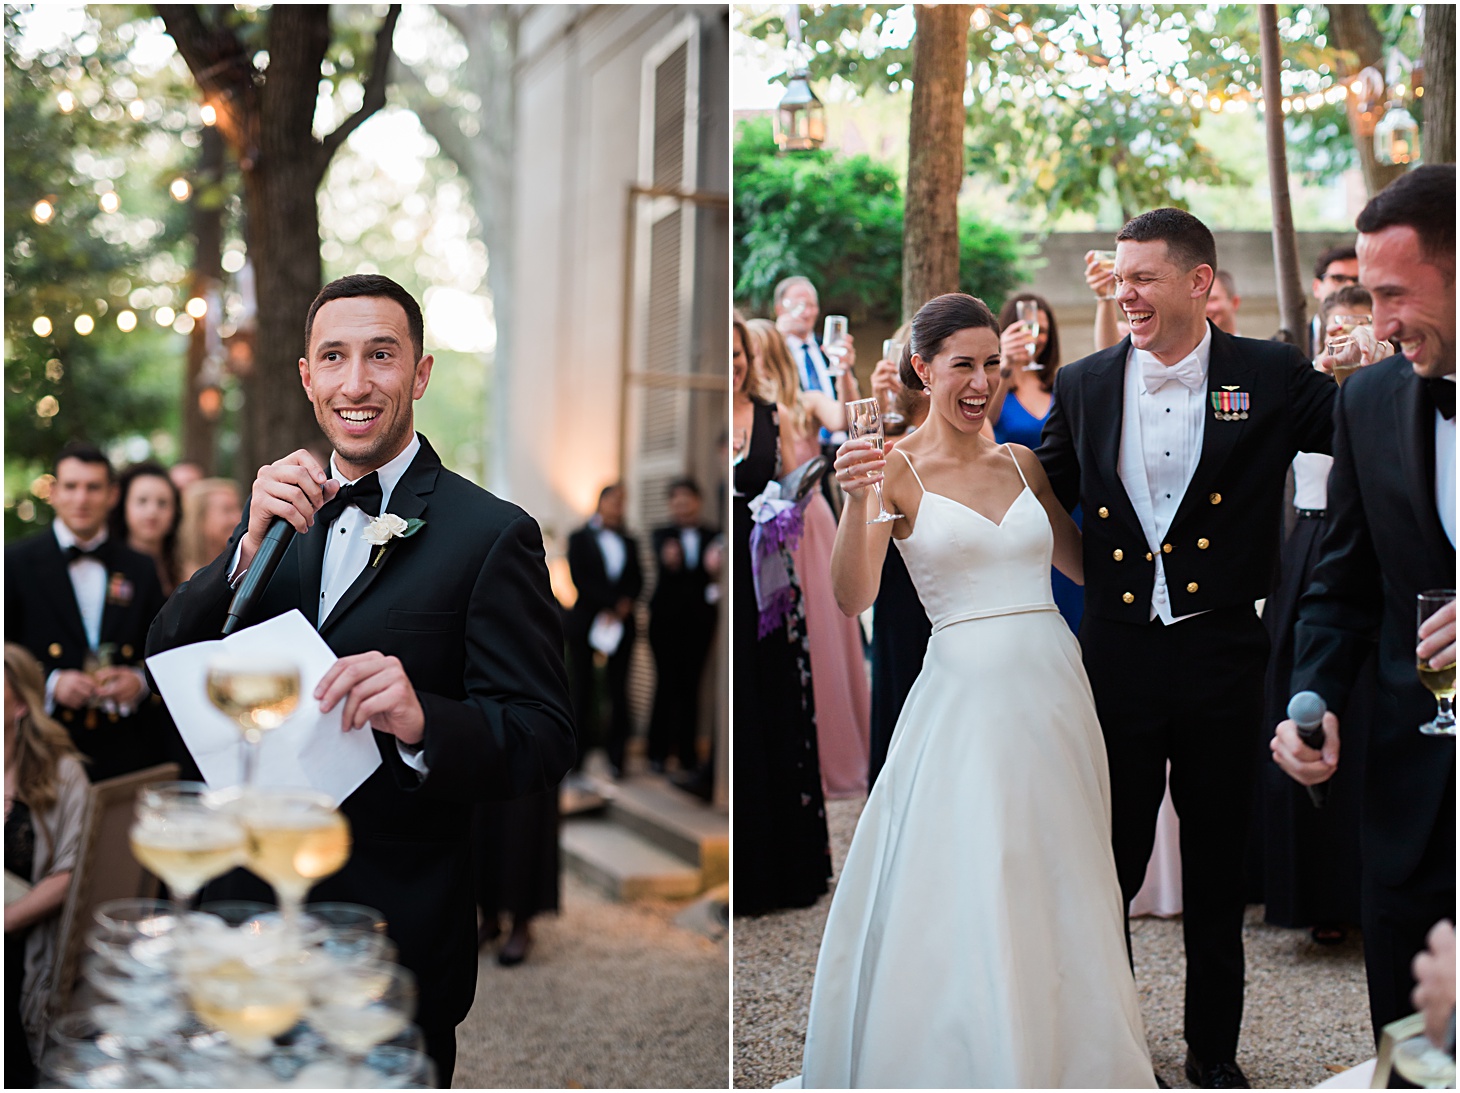 Toasts - A Thoroughly Washingtonian Wedding at Meridian House in DC by Sarah Bradshaw 